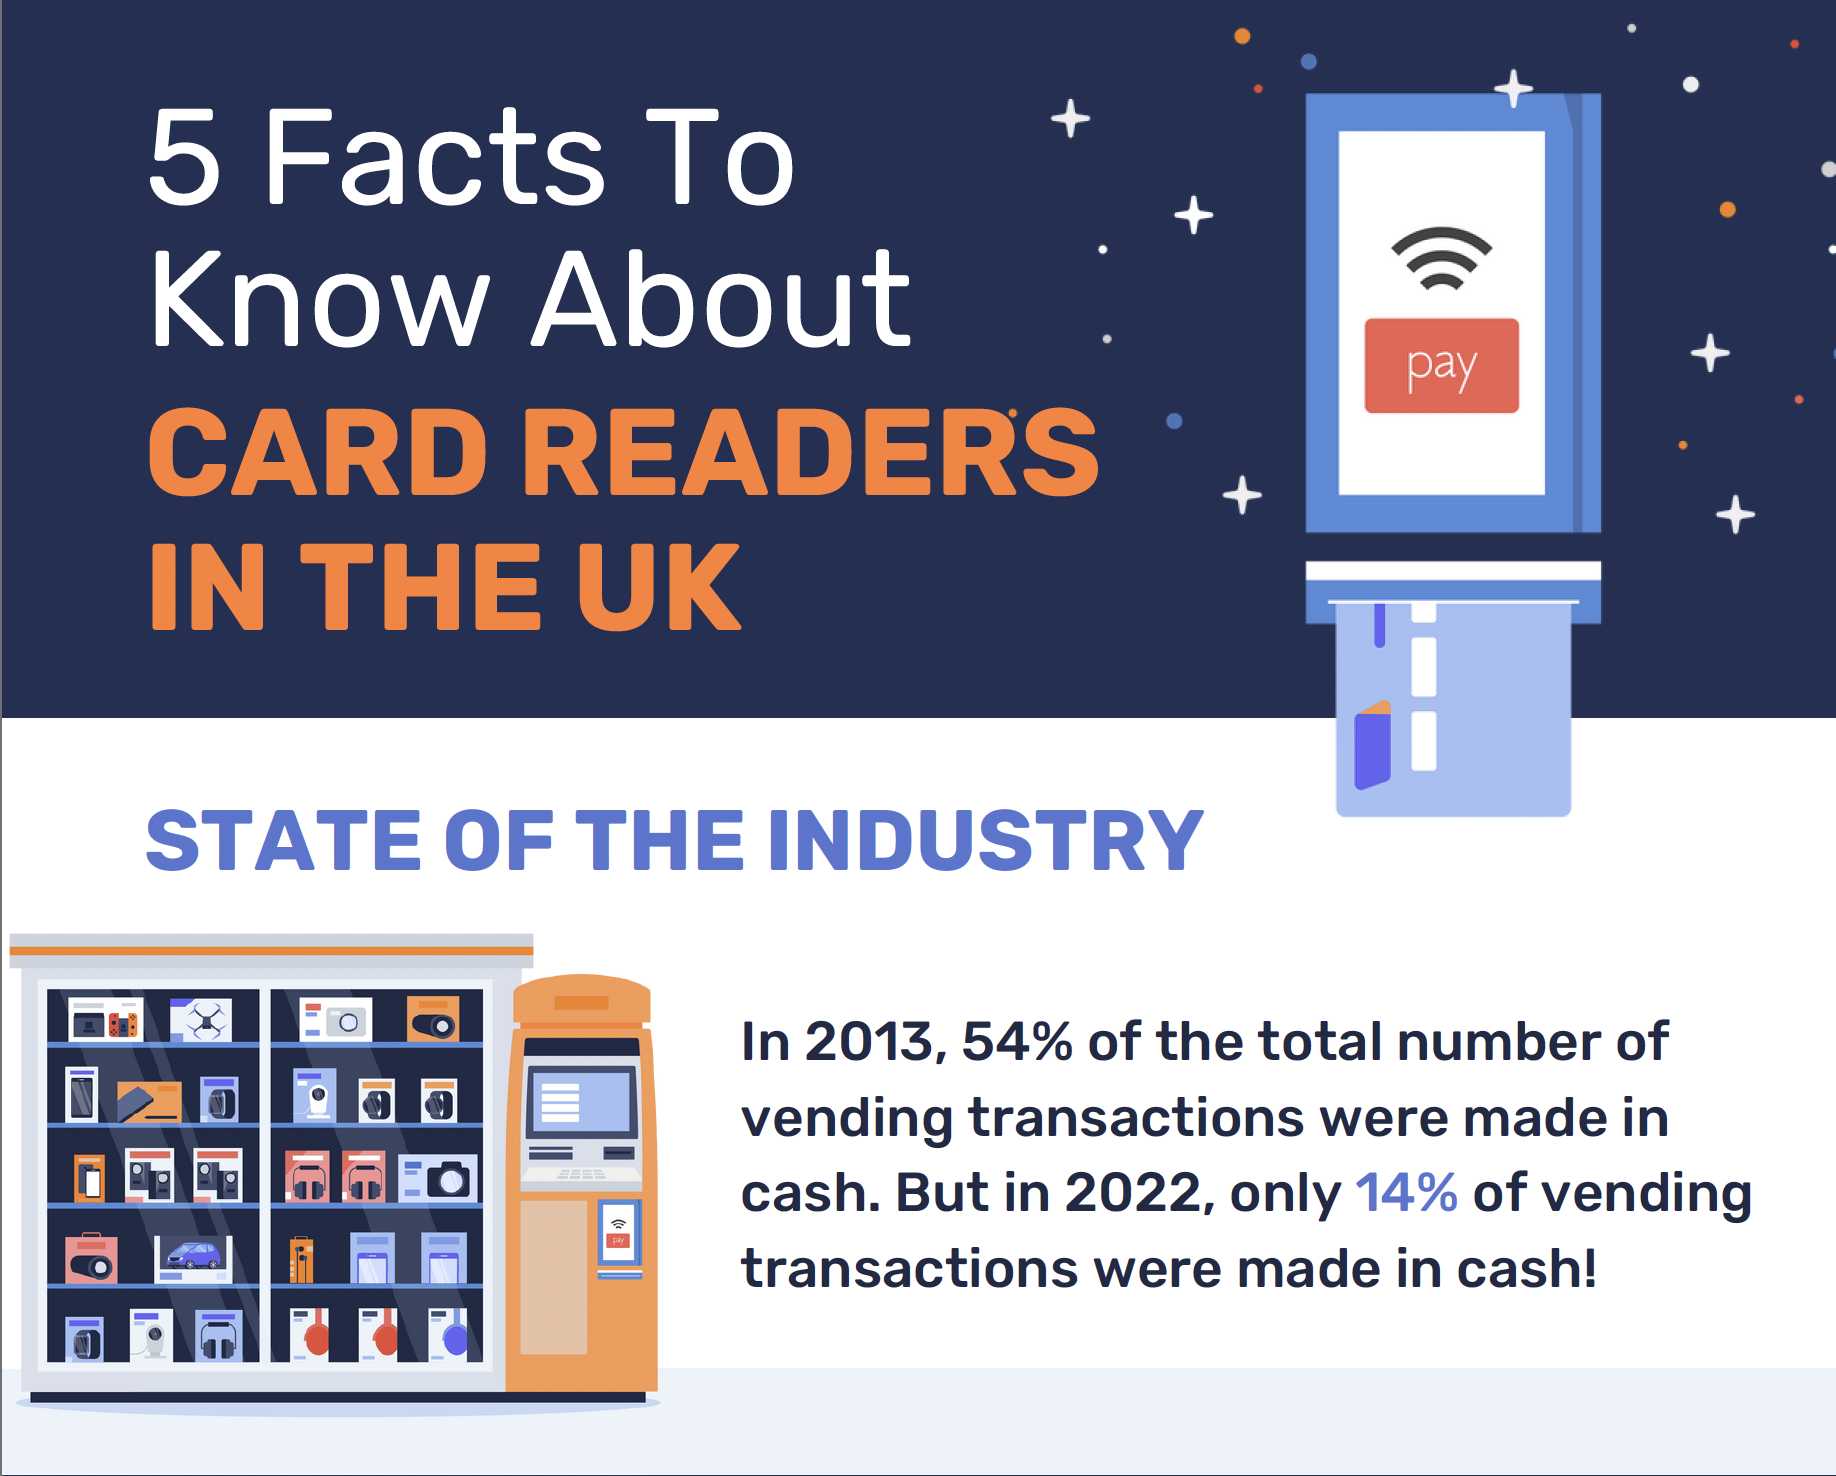 5 Facts to Know About Card Readers in the UK